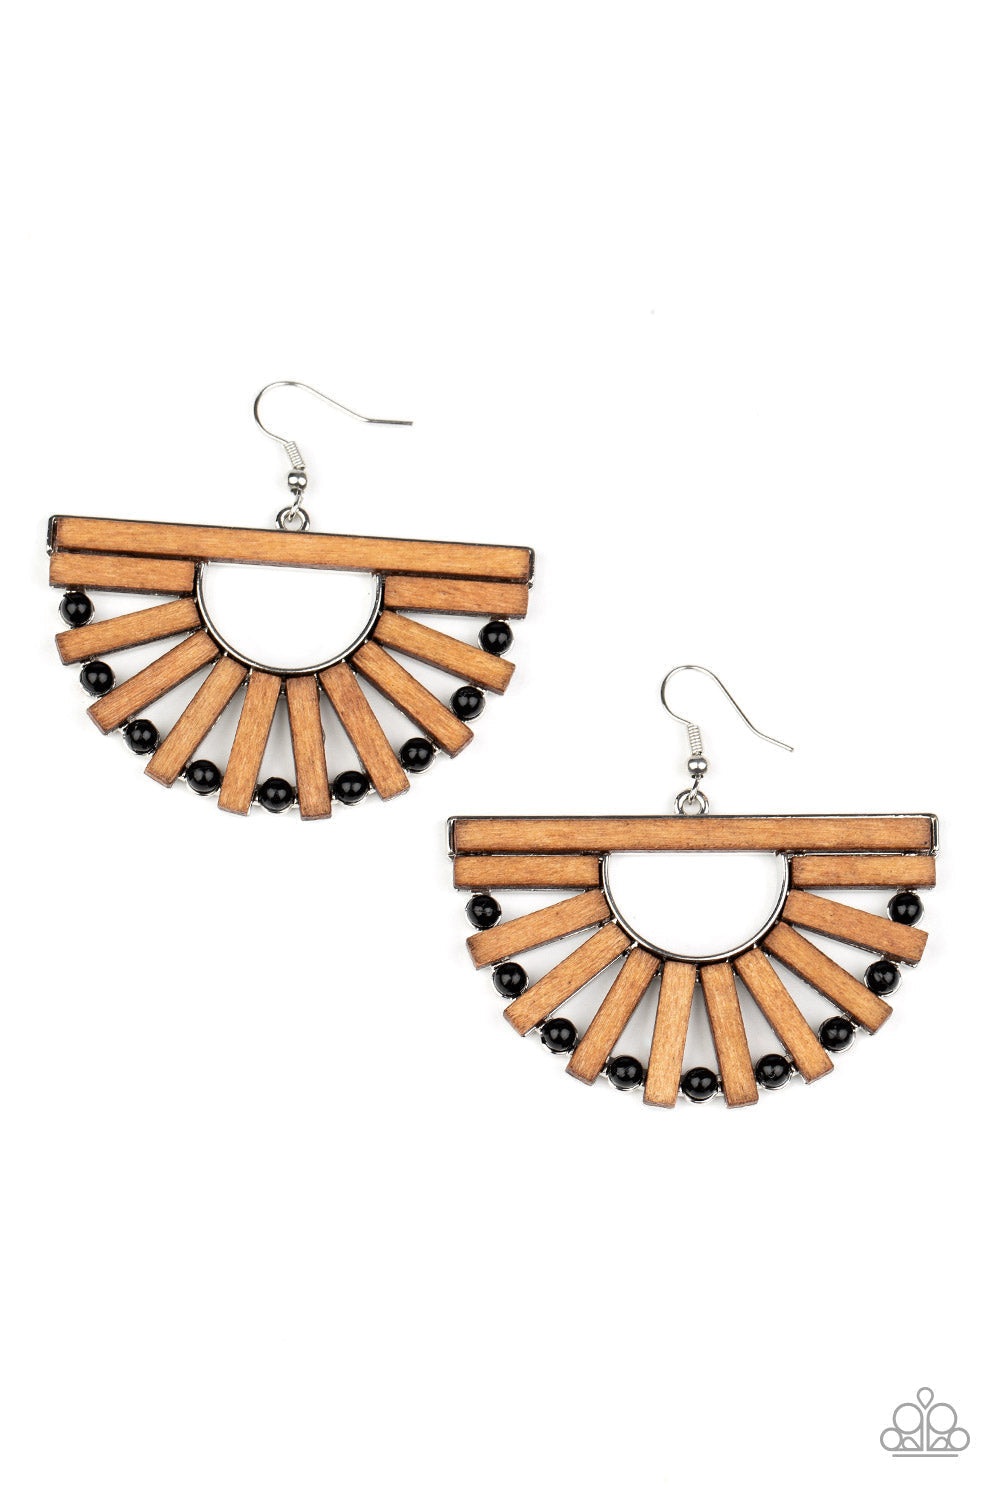 Wooden Wonderland - Black and Brown Earrings - Paparazzi Jewelry  - Bejeweled Accessories By Kristie - Wooden rectangular frames and dainty black beads alternate along an airy silver frame, coalescing into a radiant crescent for an earthy flair.